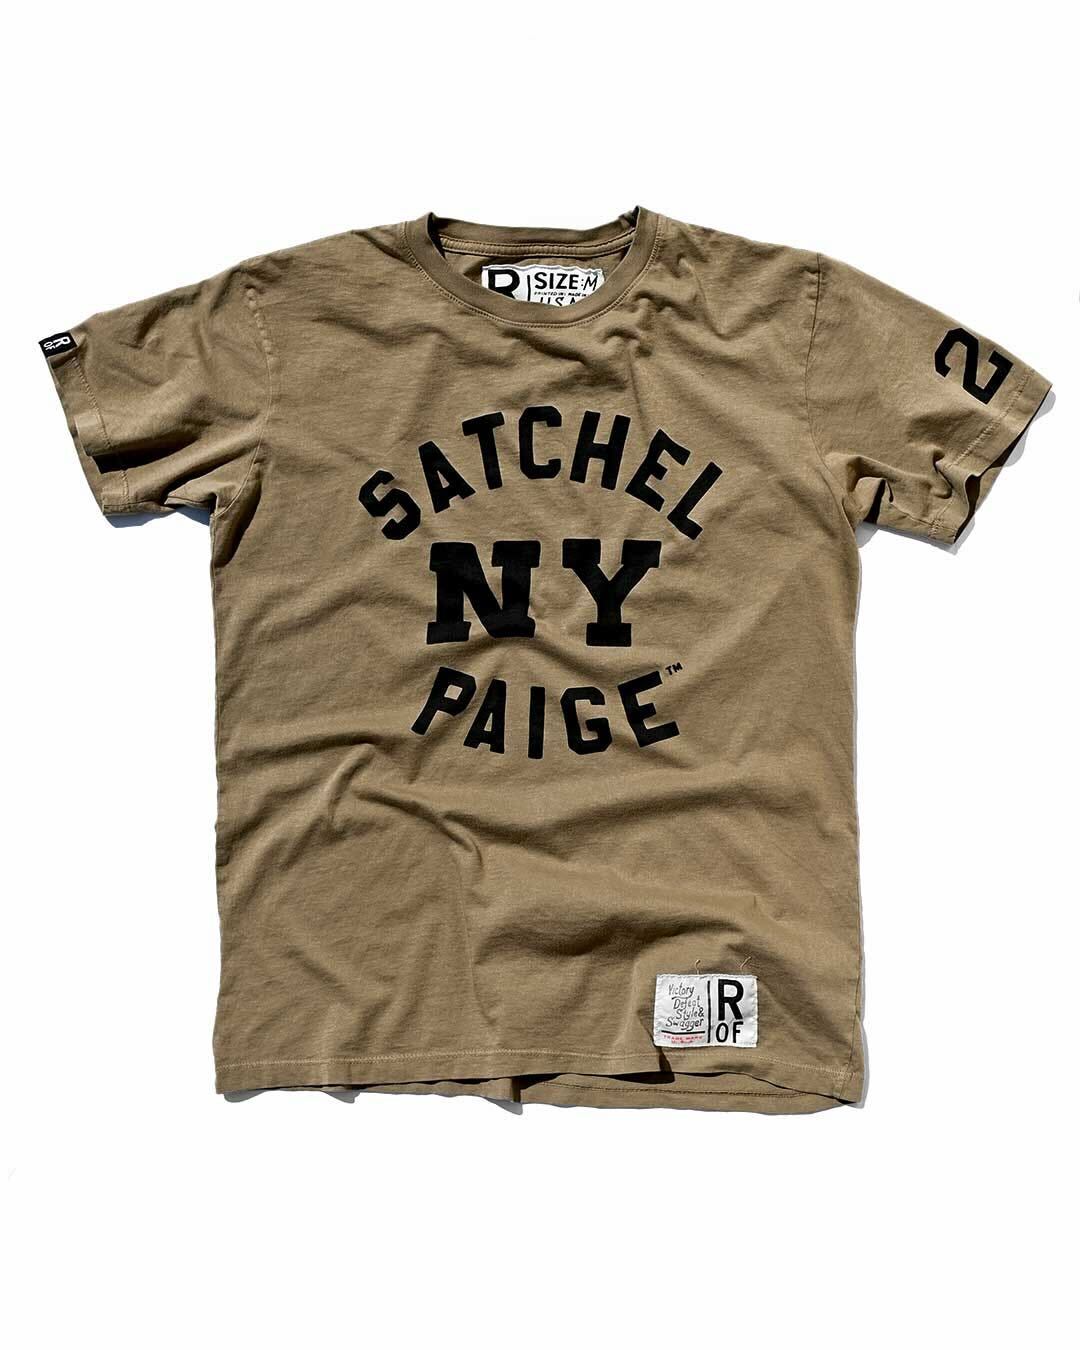 Satchel Paige #24 NY Olive Tee - Roots of Fight Canada